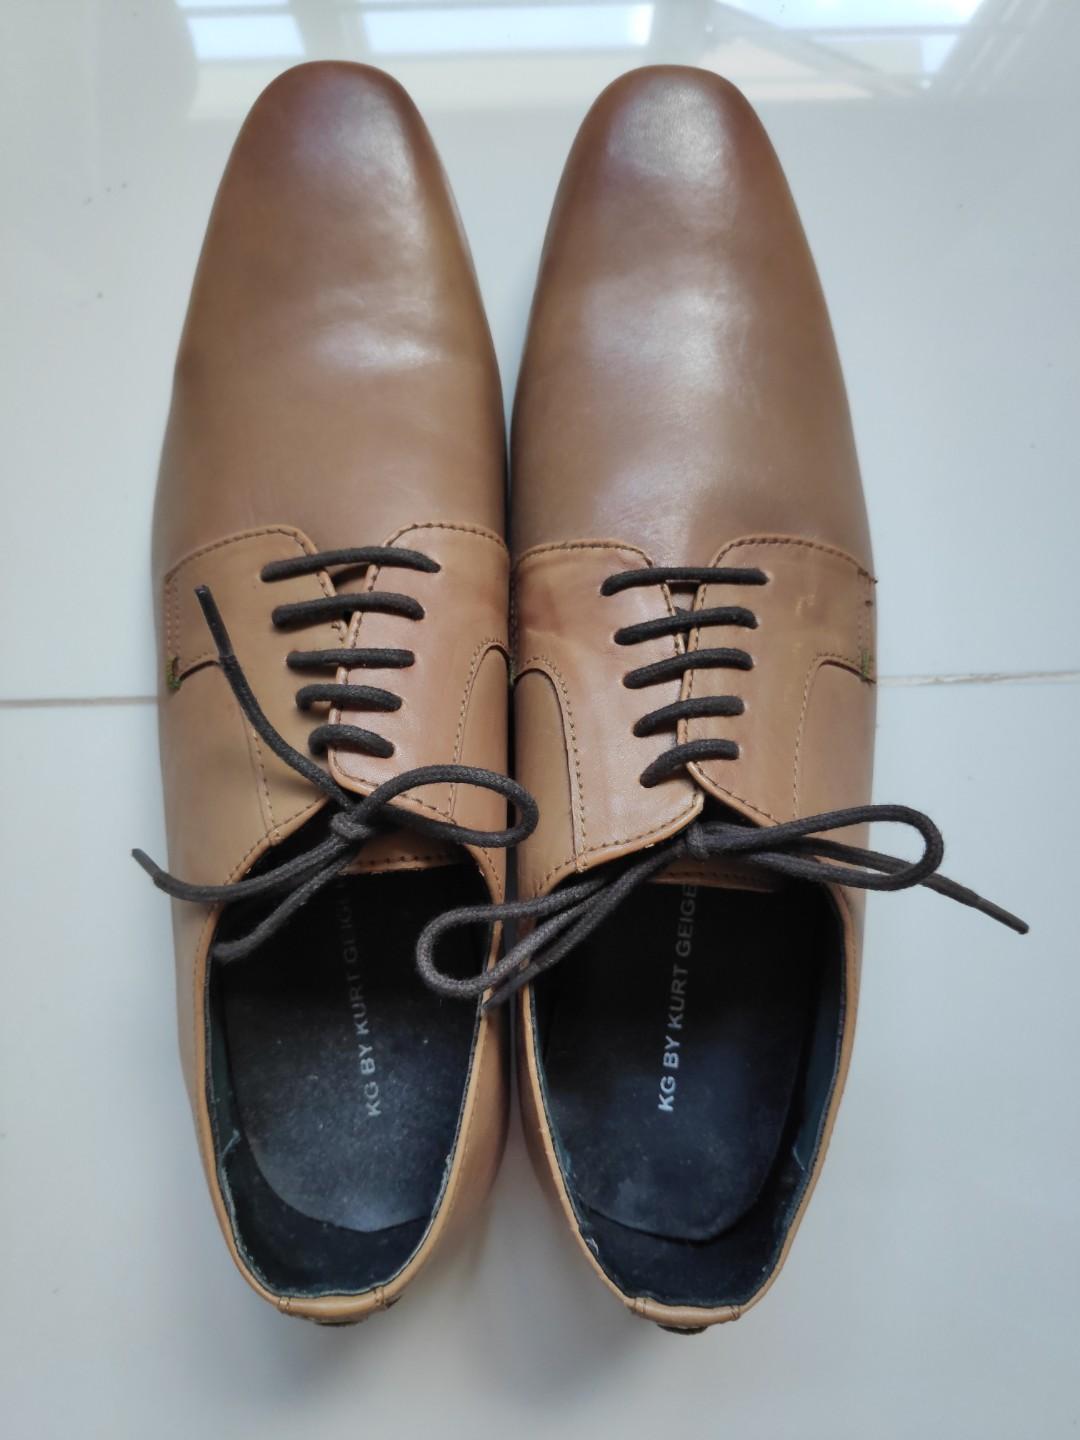 Brown leather derby formal shoes by KG 